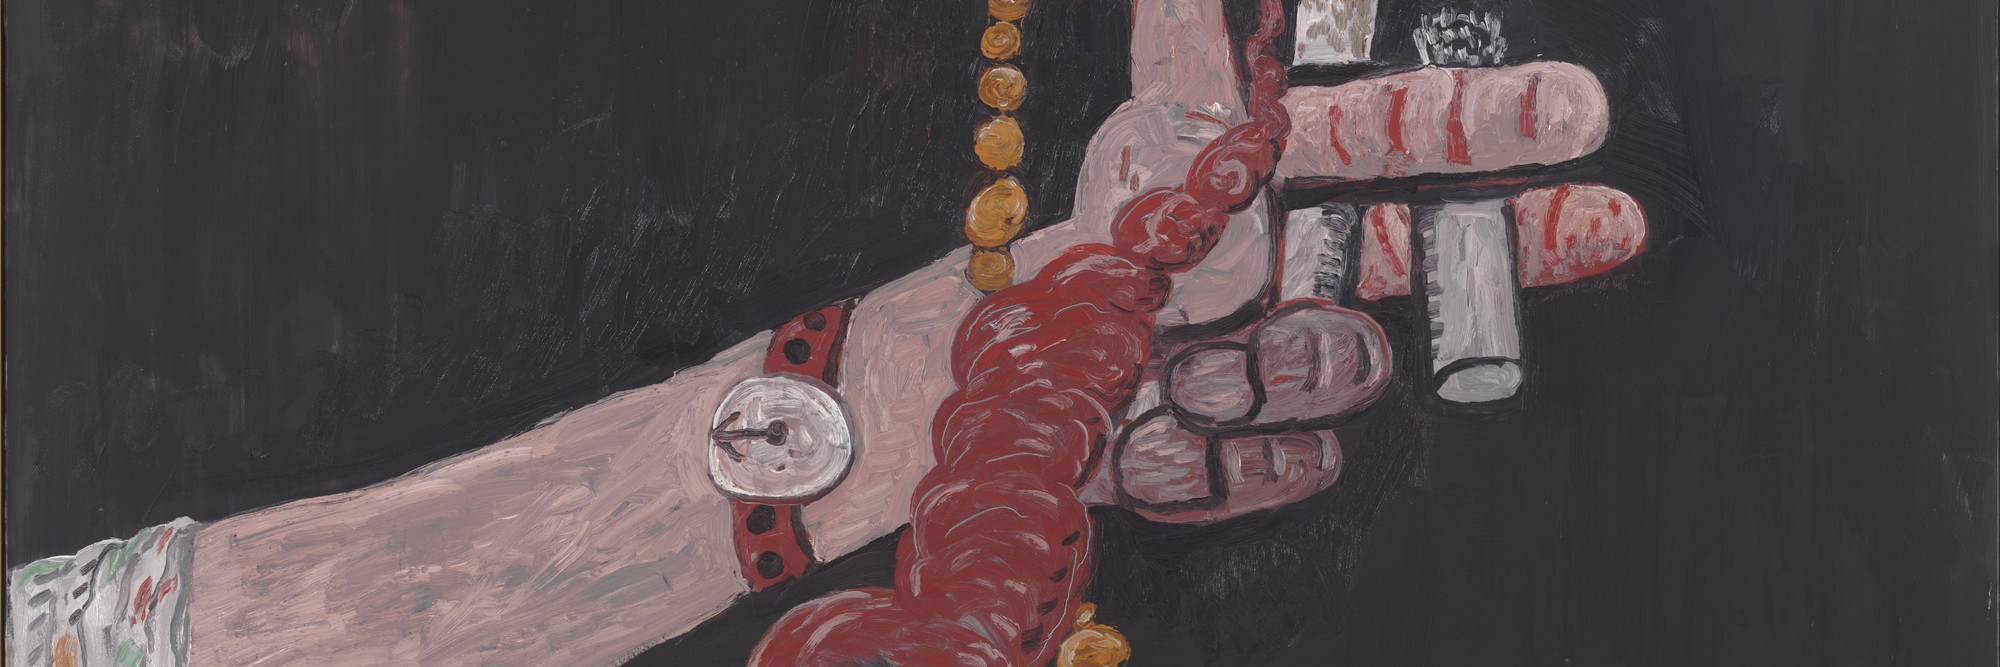 Philip Guston. Talking. 1979. Oil on canvas, 68 1/8″ × 6′ 6 1/4″ (173 × 198.8 cm). Gift of Edward R. Broida. © 2016 The Estate of Philip Guston